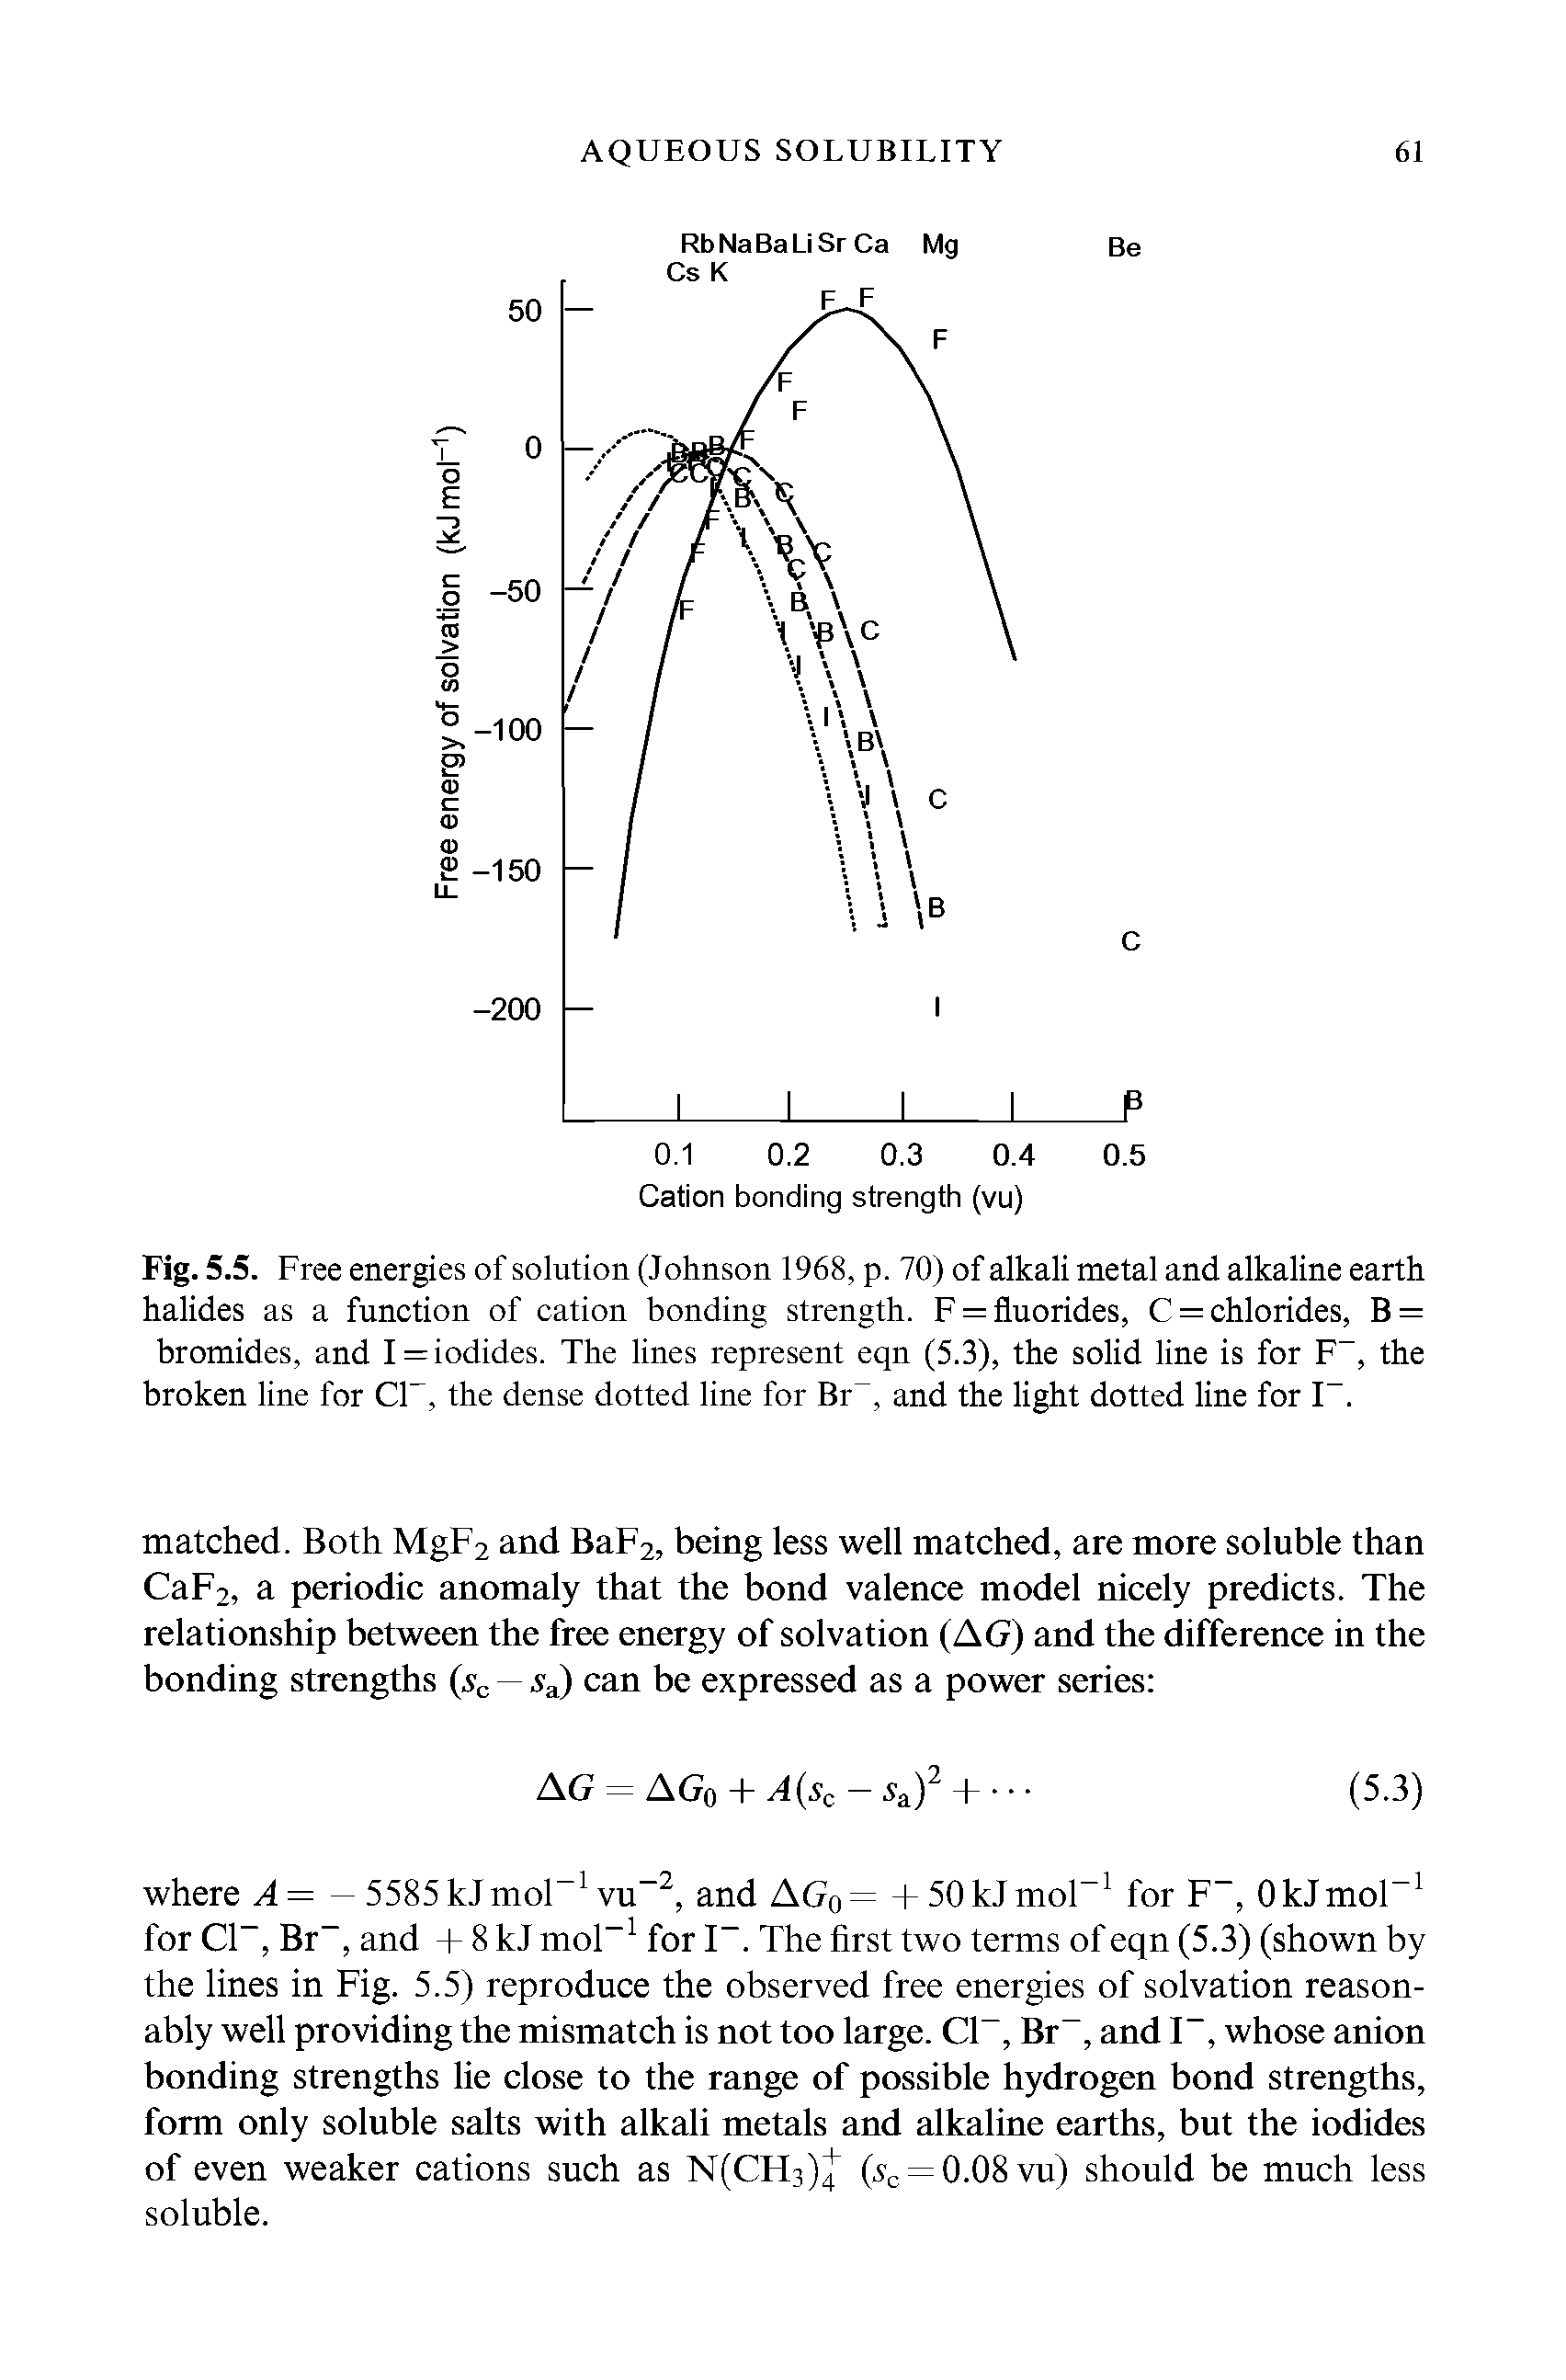 Fig. 5.5. Free energies of solution (Johnson 1968, p. 70) of alkali metal and alkaline earth halides as a function of cation bonding strength. F = fluorides, C = chlorides, B = bromides, and I = iodides. The lines represent eqn (5.3), the solid line is for F , the broken line for CP, the dense dotted line for Br, and the light dotted line for P.